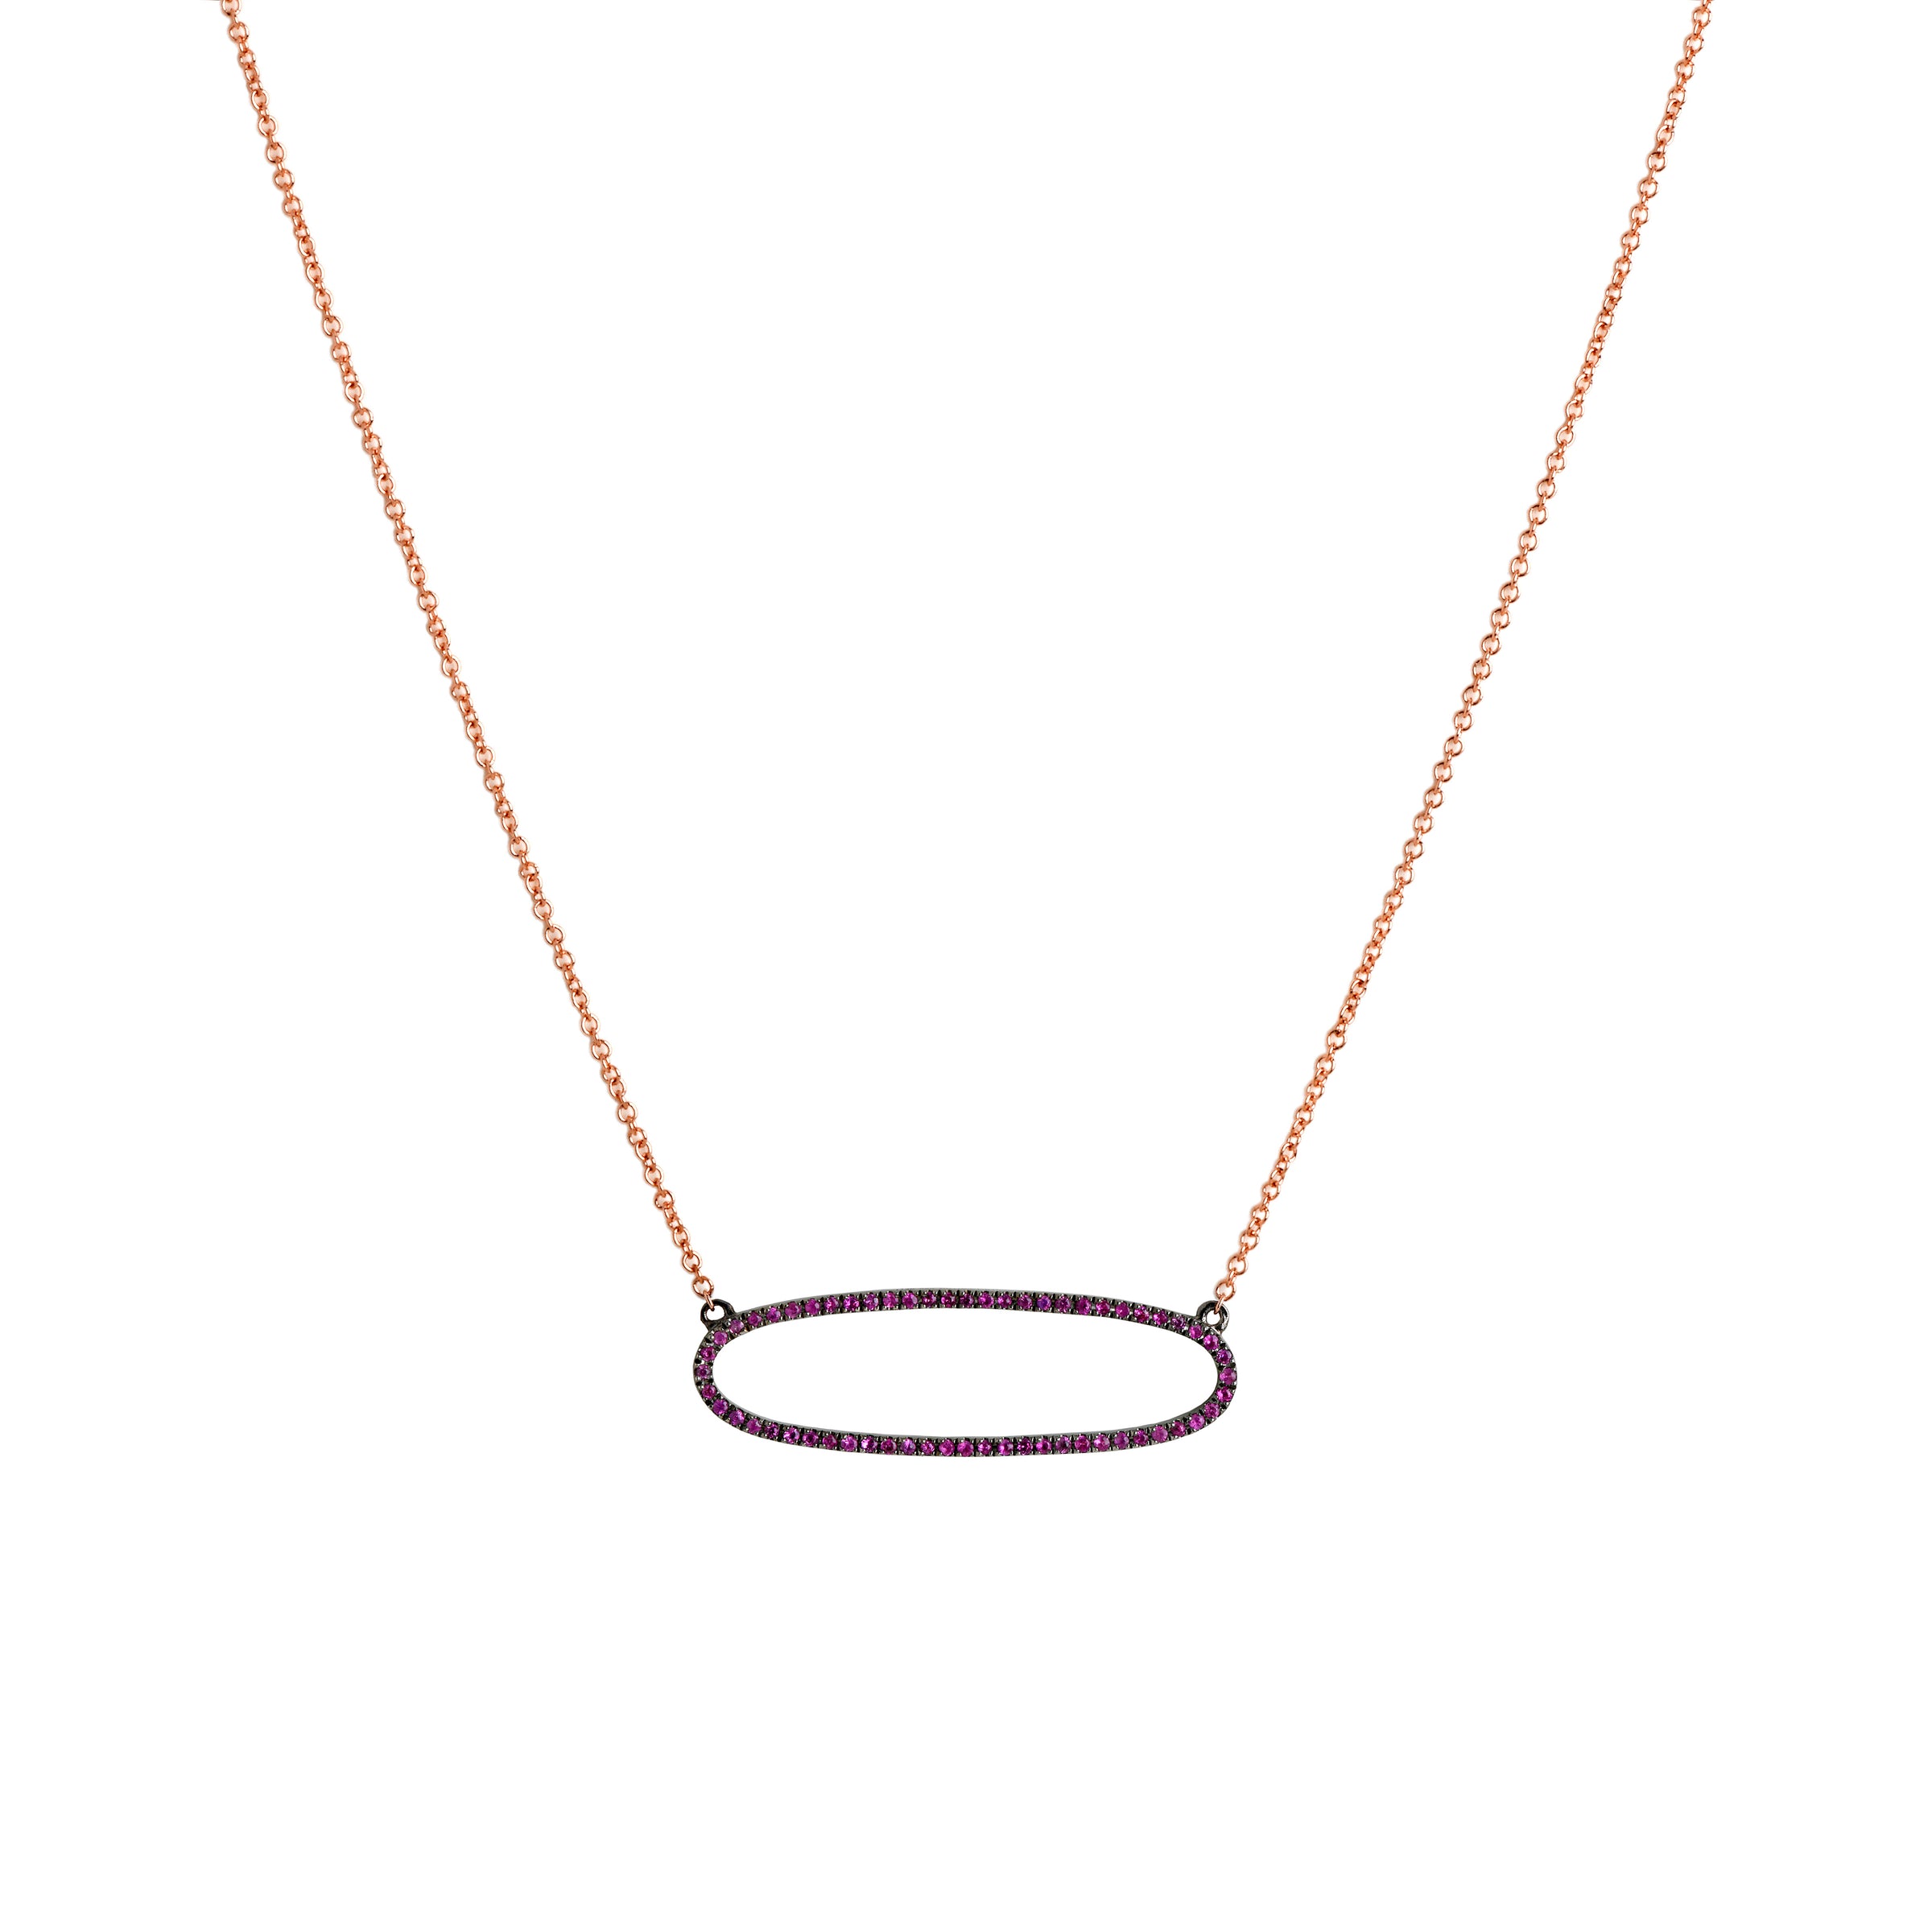 REVERSIBLE PINK SAPPHIRE OVAL NECKLACE - Bridget King Jewelry